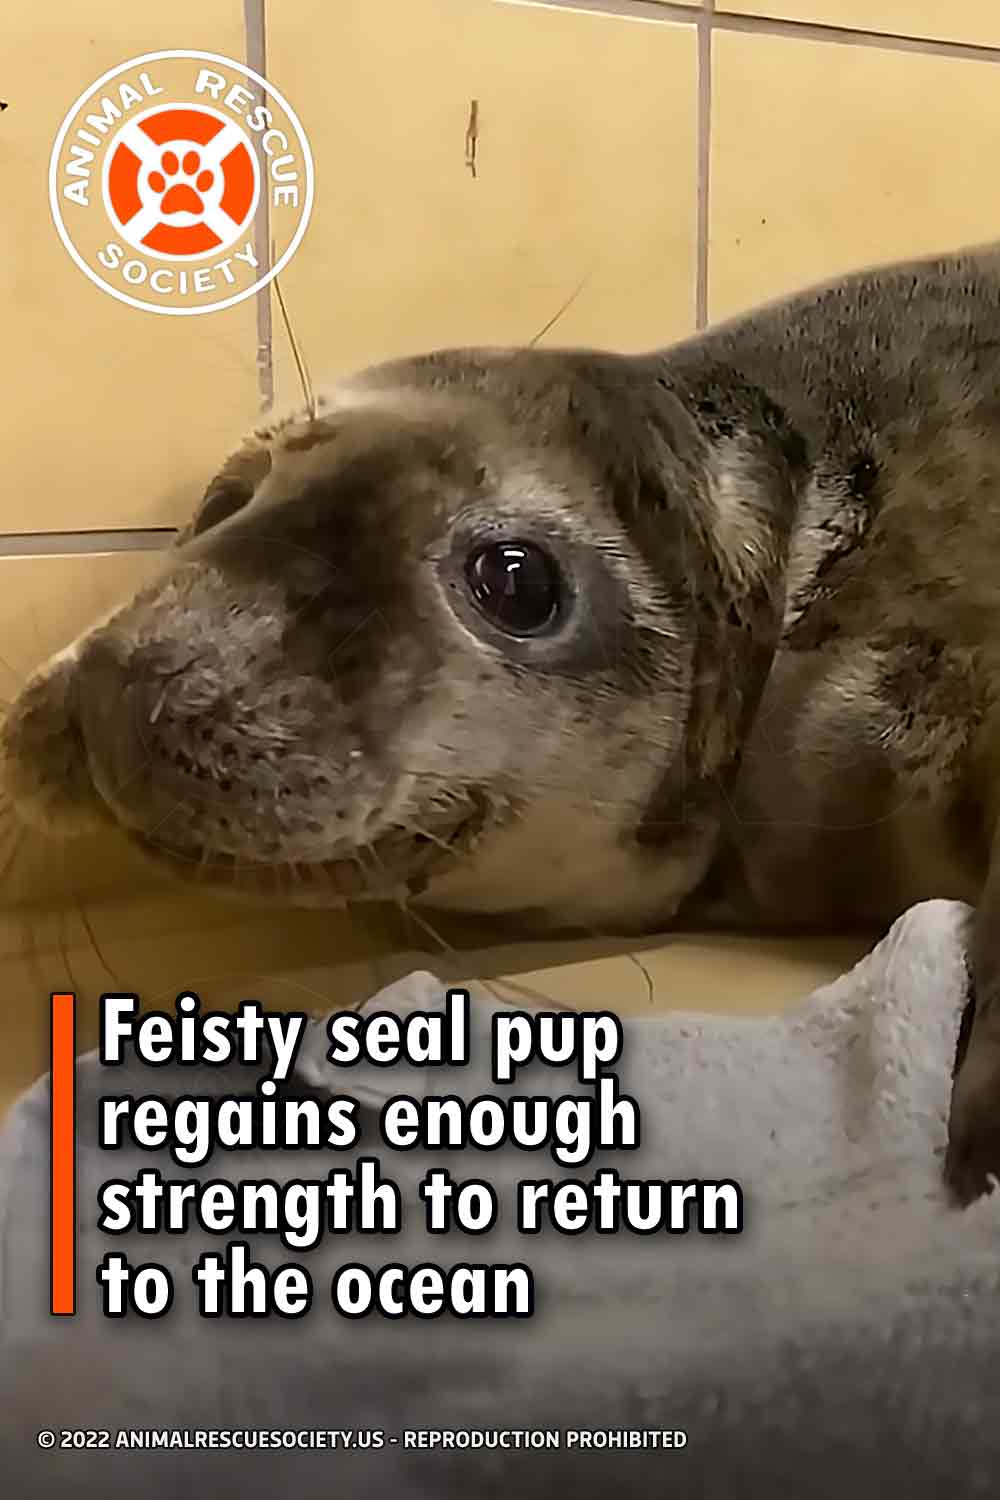 Feisty seal pup regains enough strength to return to the ocean